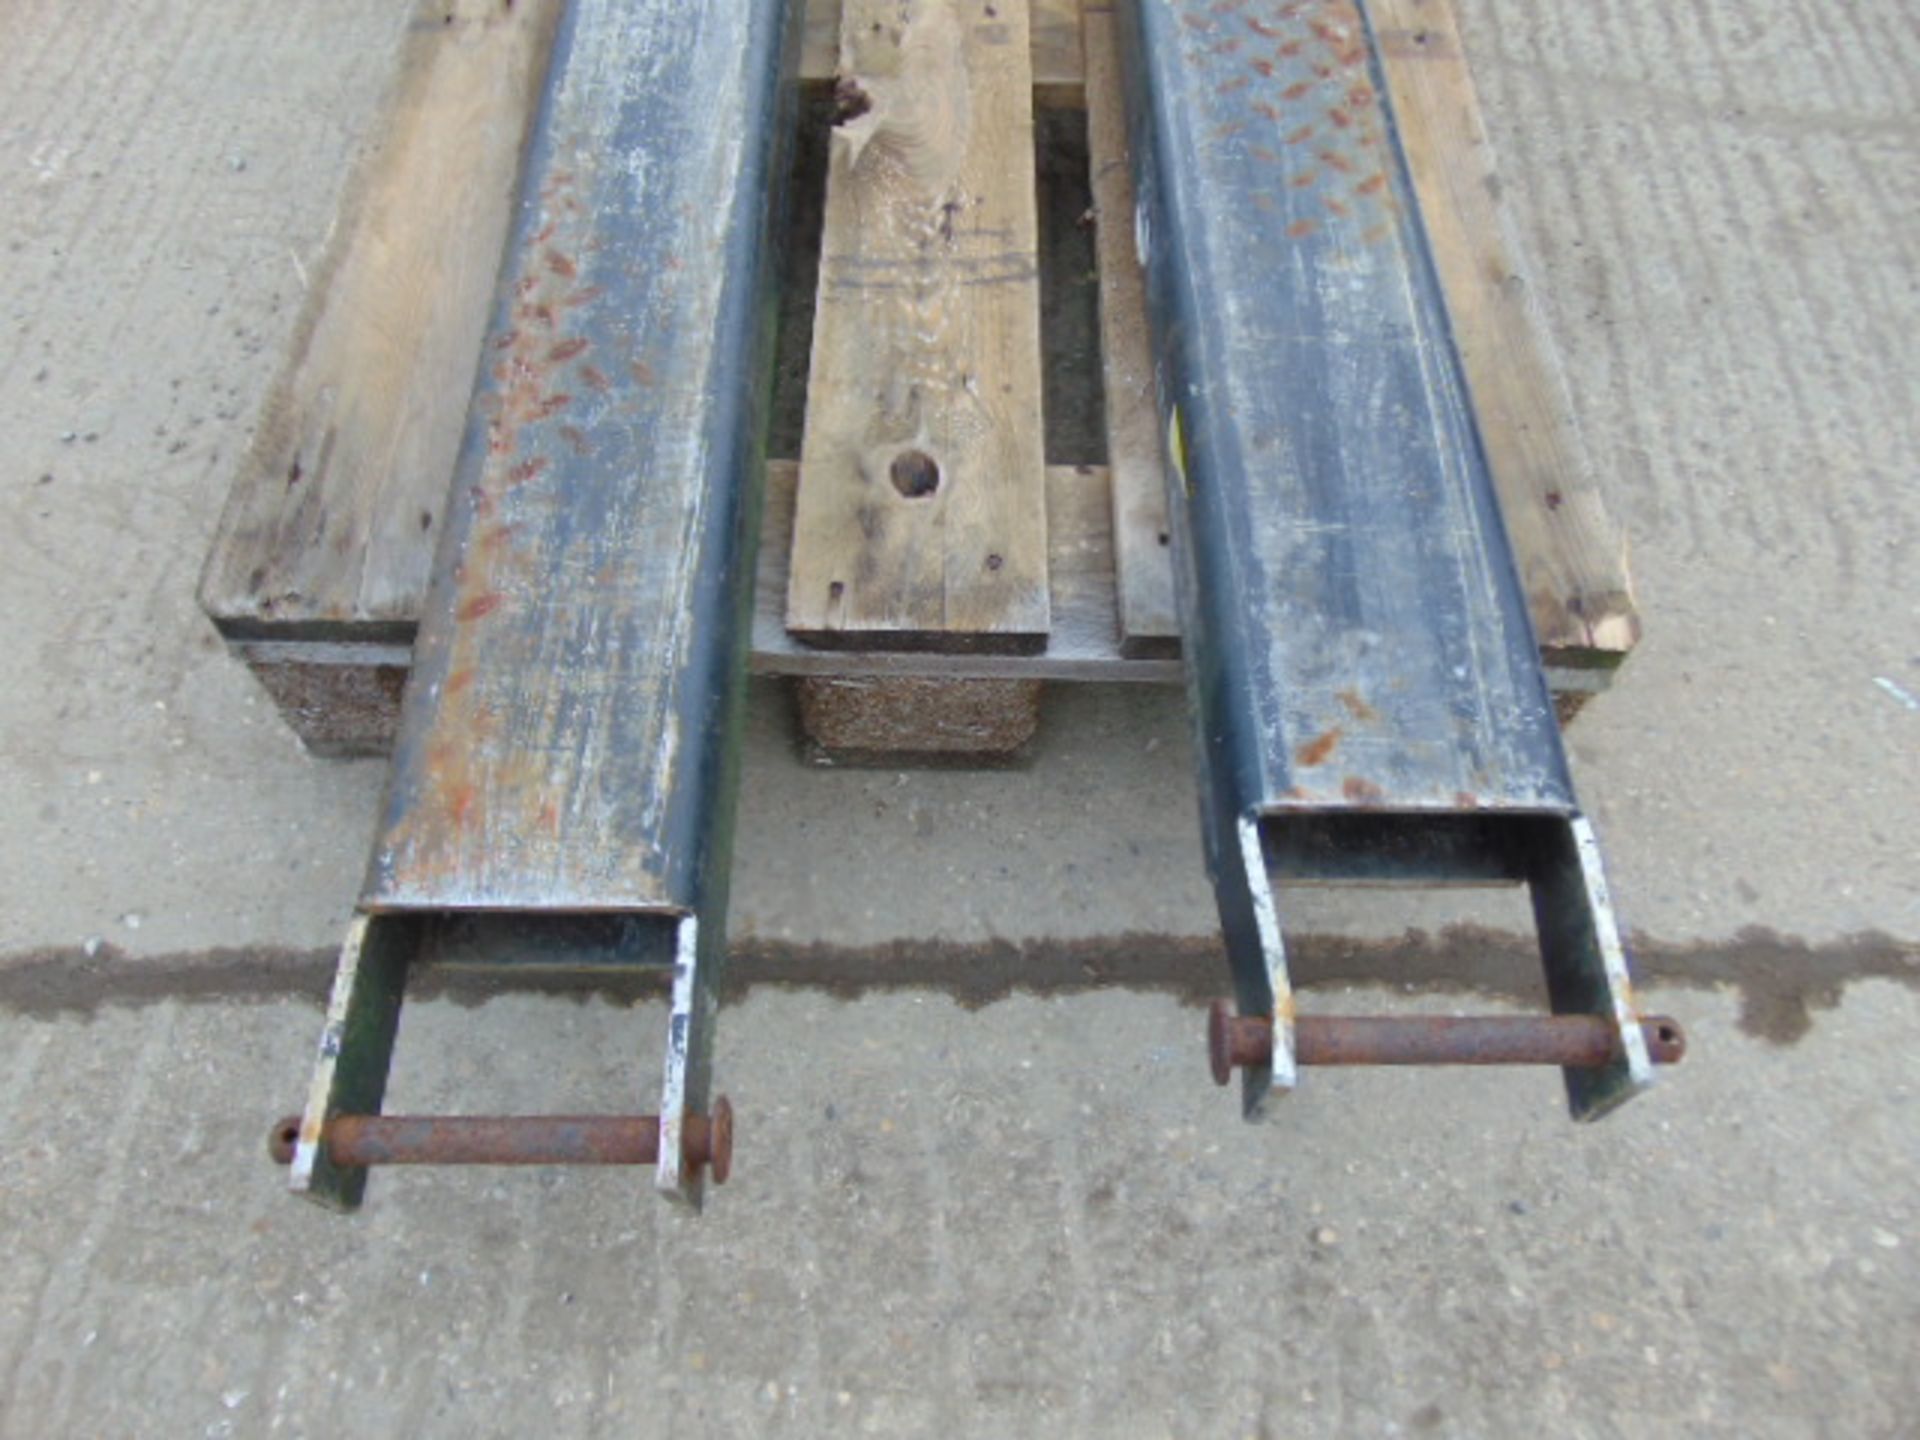 2 x Forklift Tine Extensions - Image 2 of 2